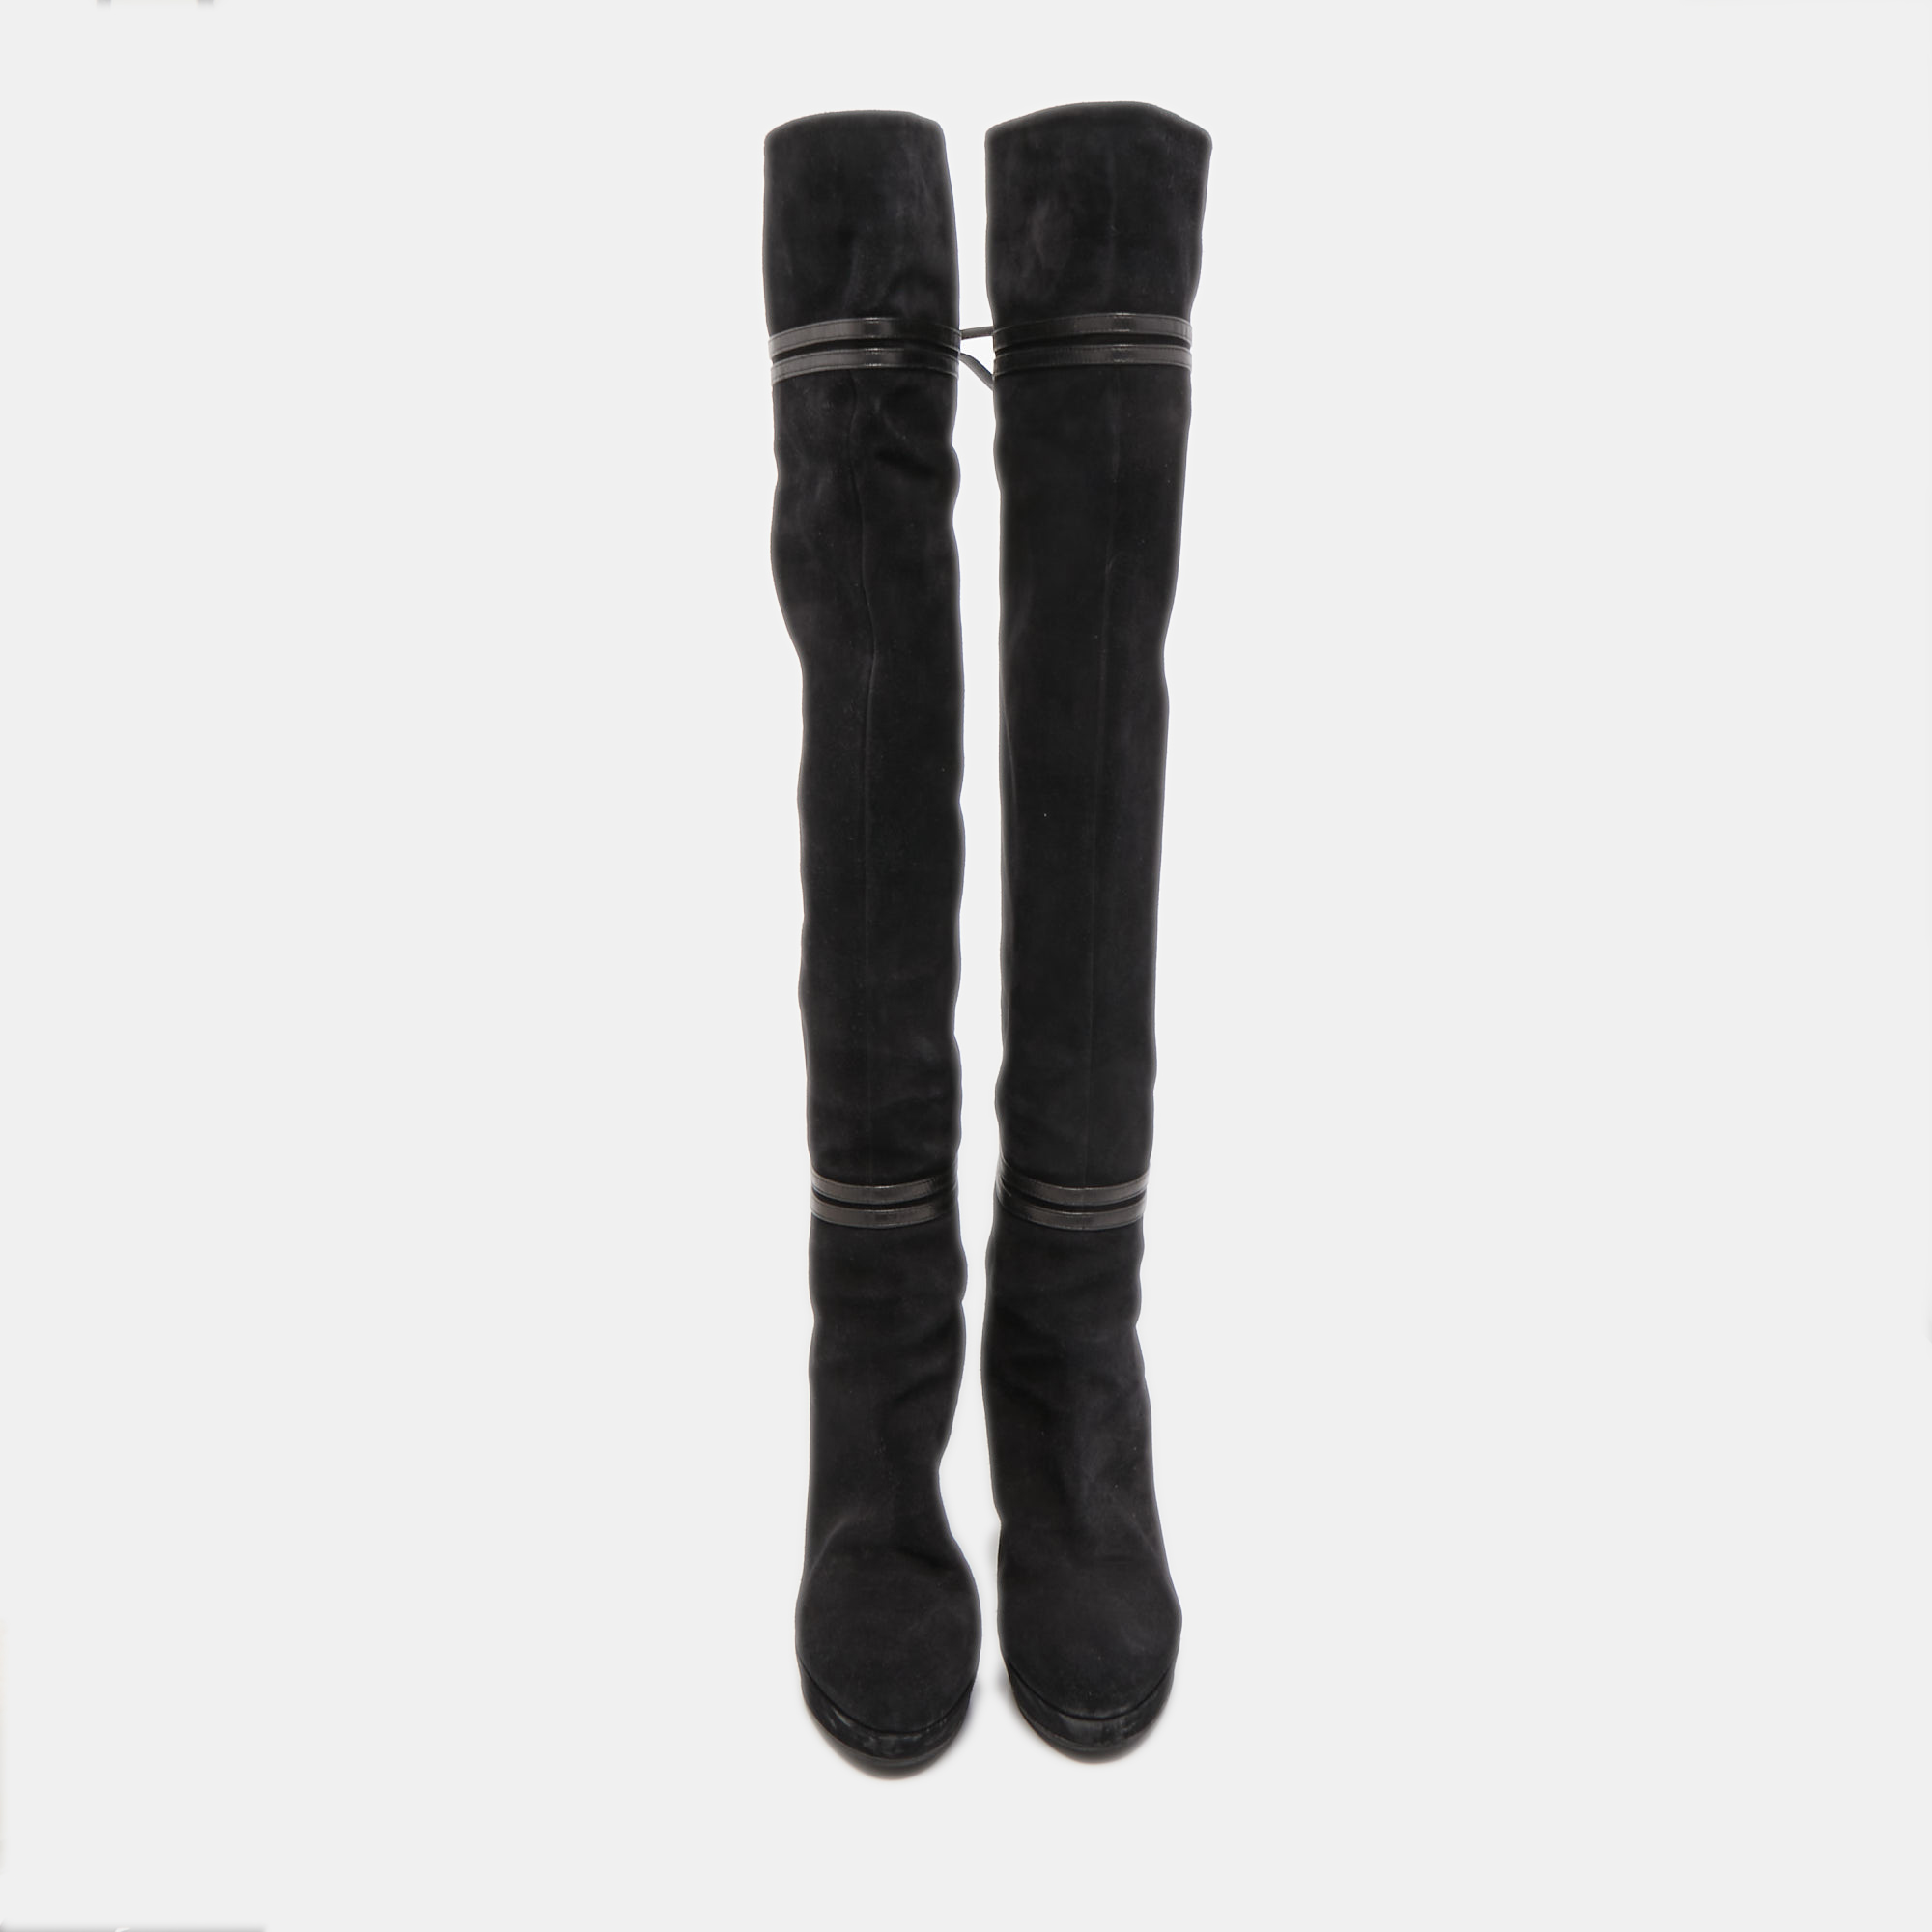 Gucci Black Suede And Leather Bow Over The Knee Boots Size 36.5